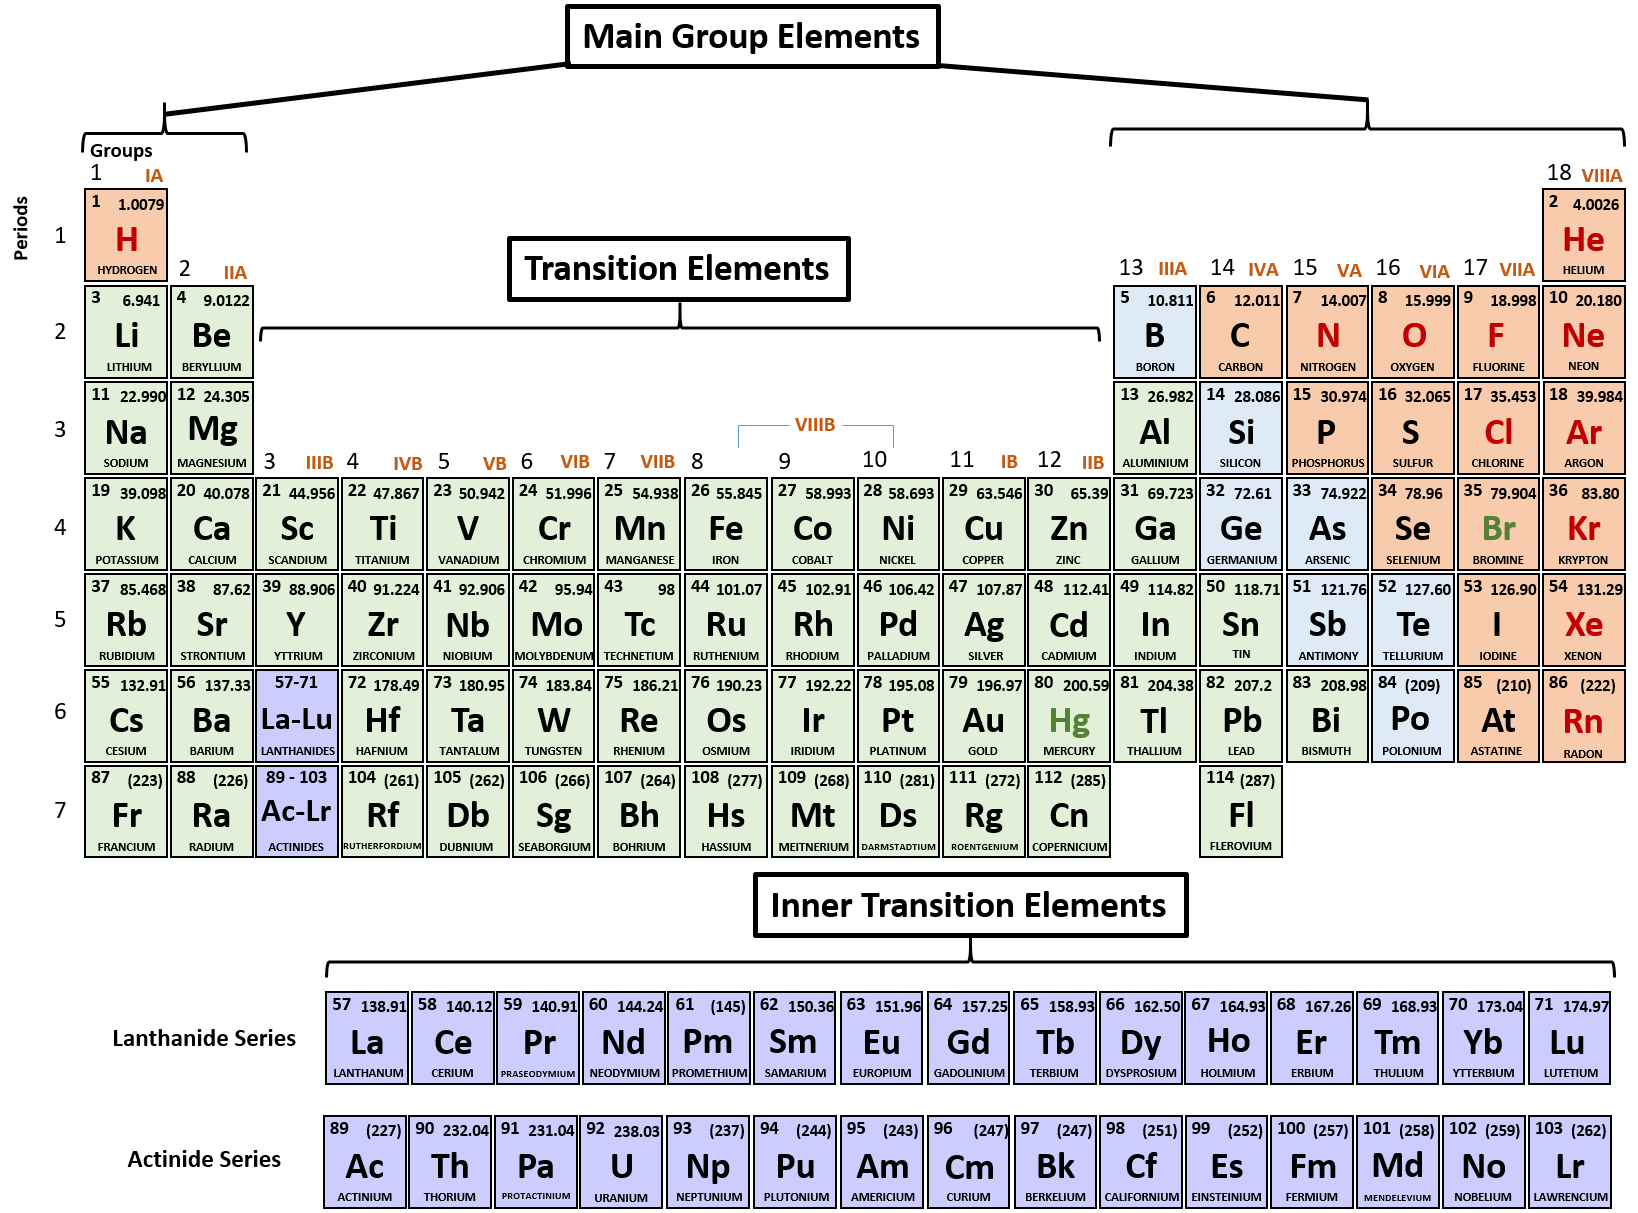 na charge periodic table